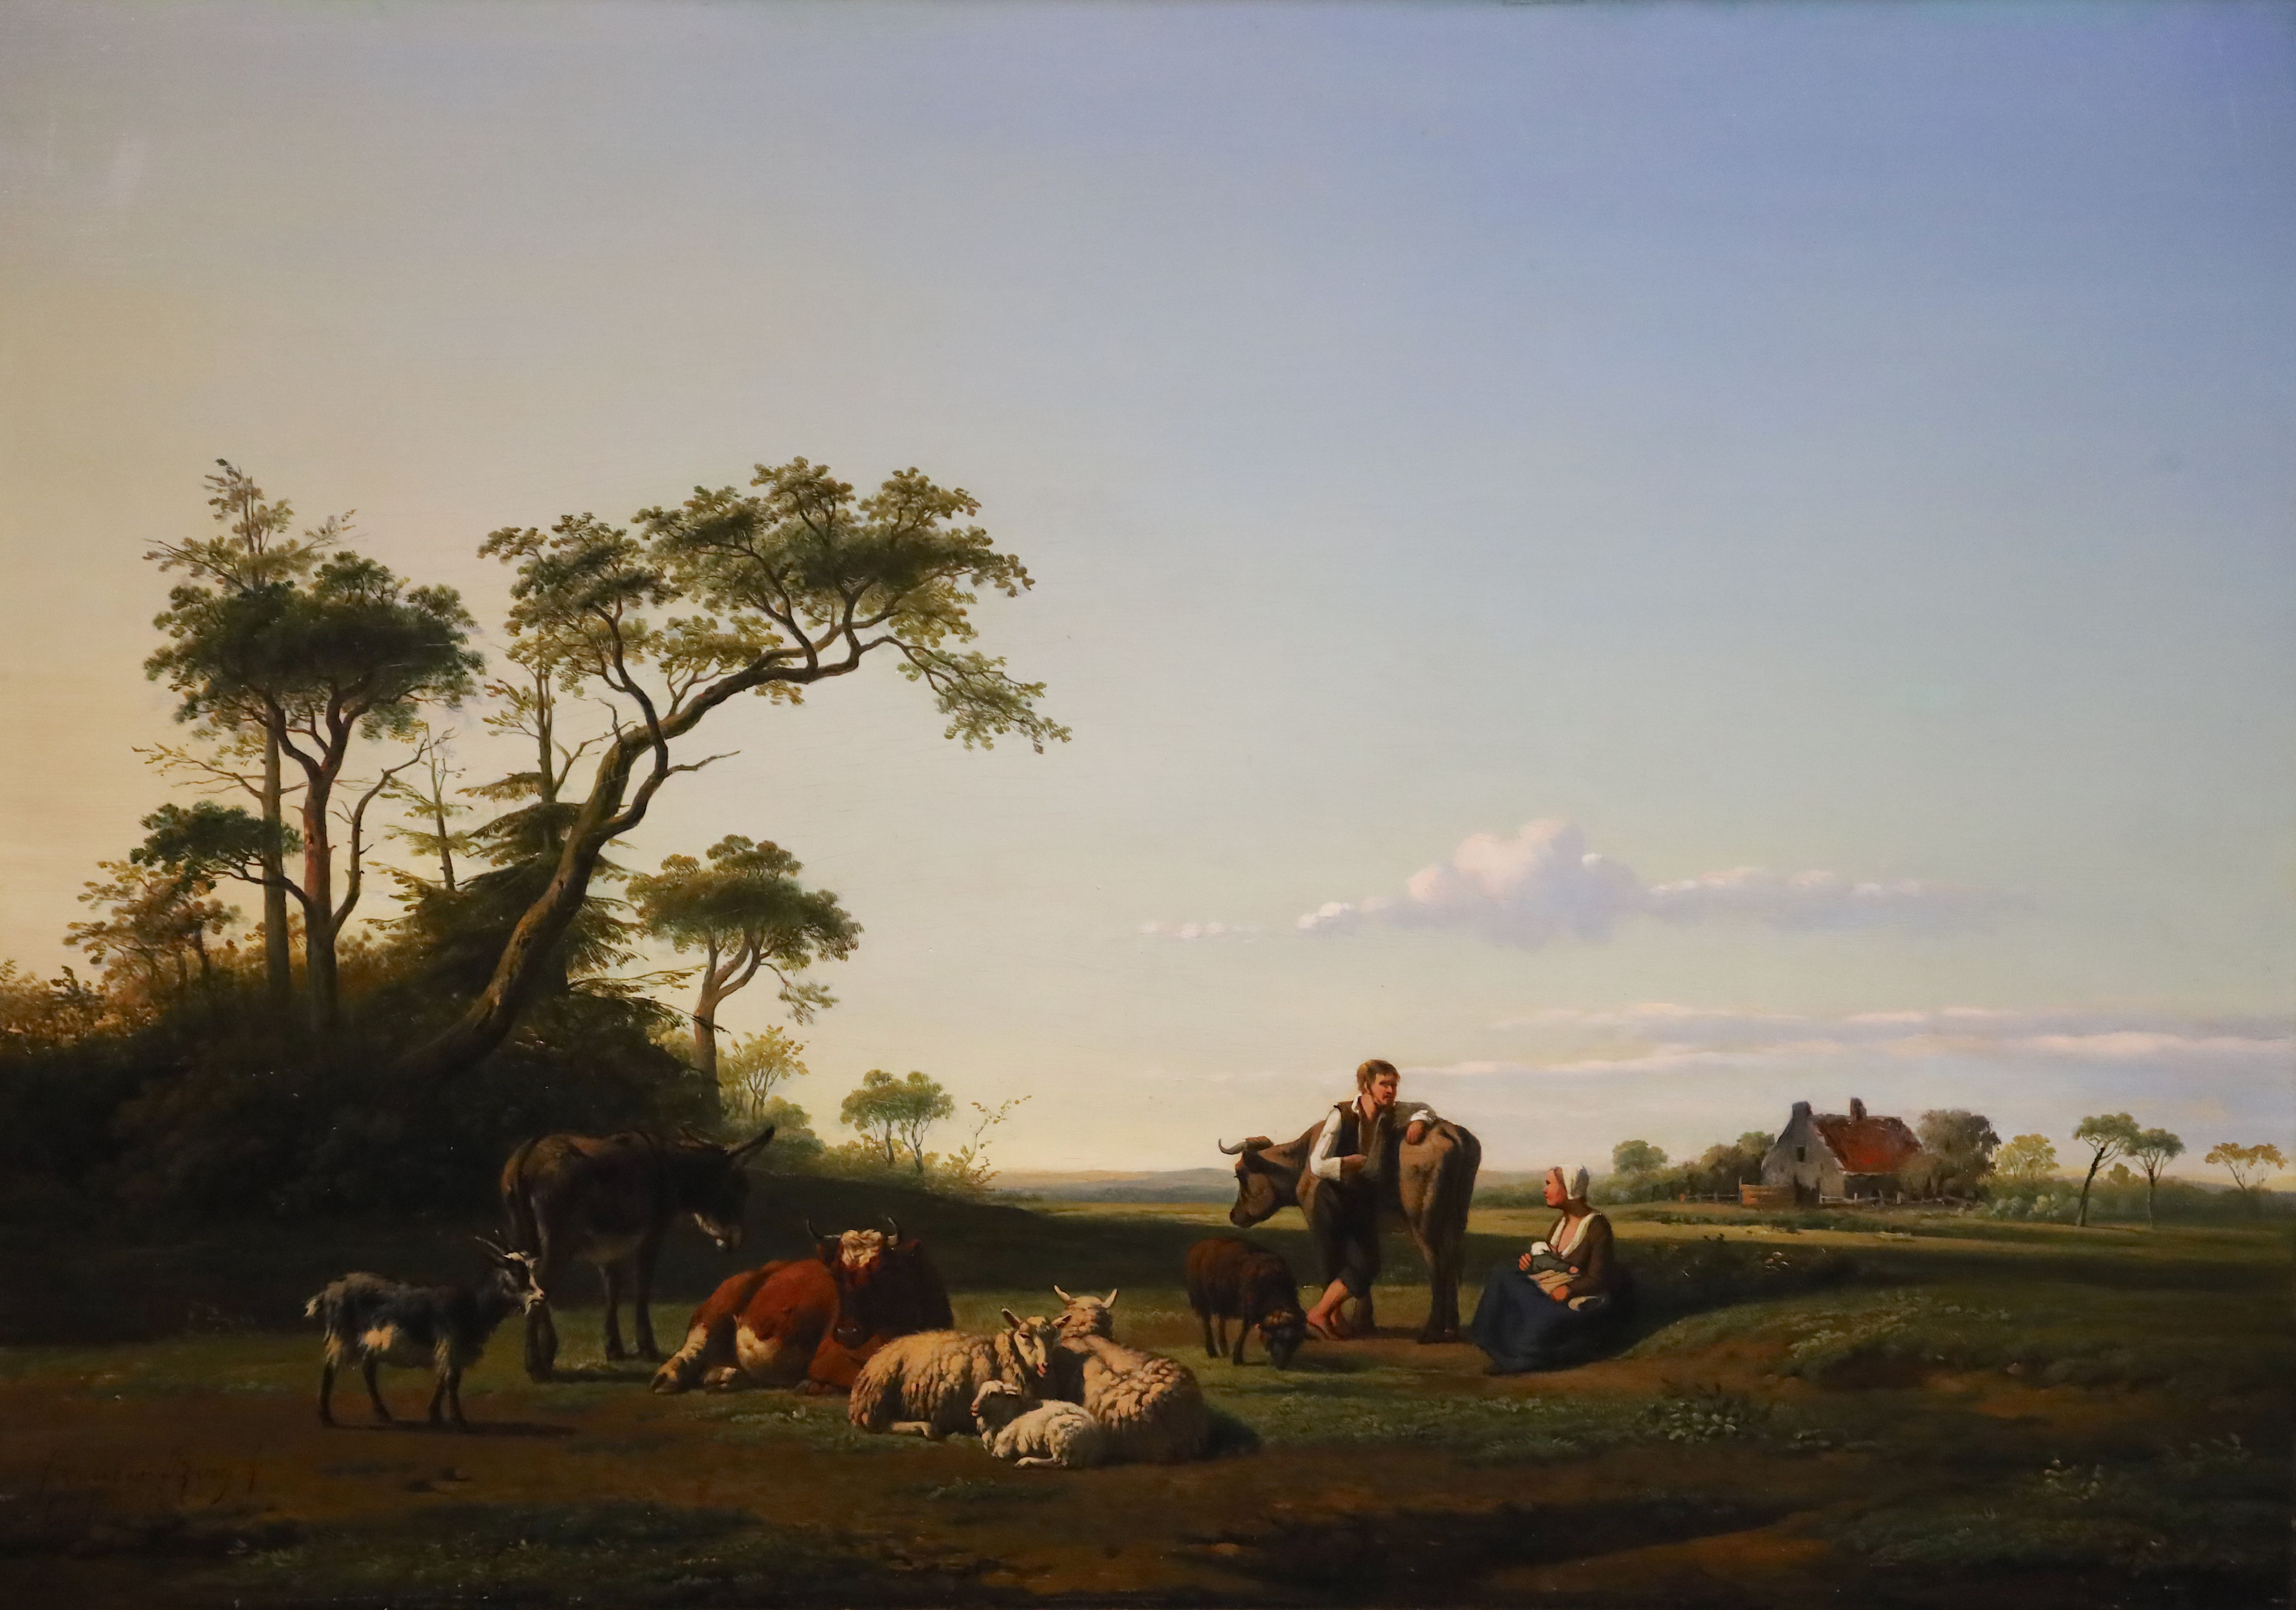 Simon van den Berg (Dutch, 1812-1891) and Christiaan Immerzeel (Dutch, 1808-1886) Open landscape with figures, sheep, a cow, donkey and